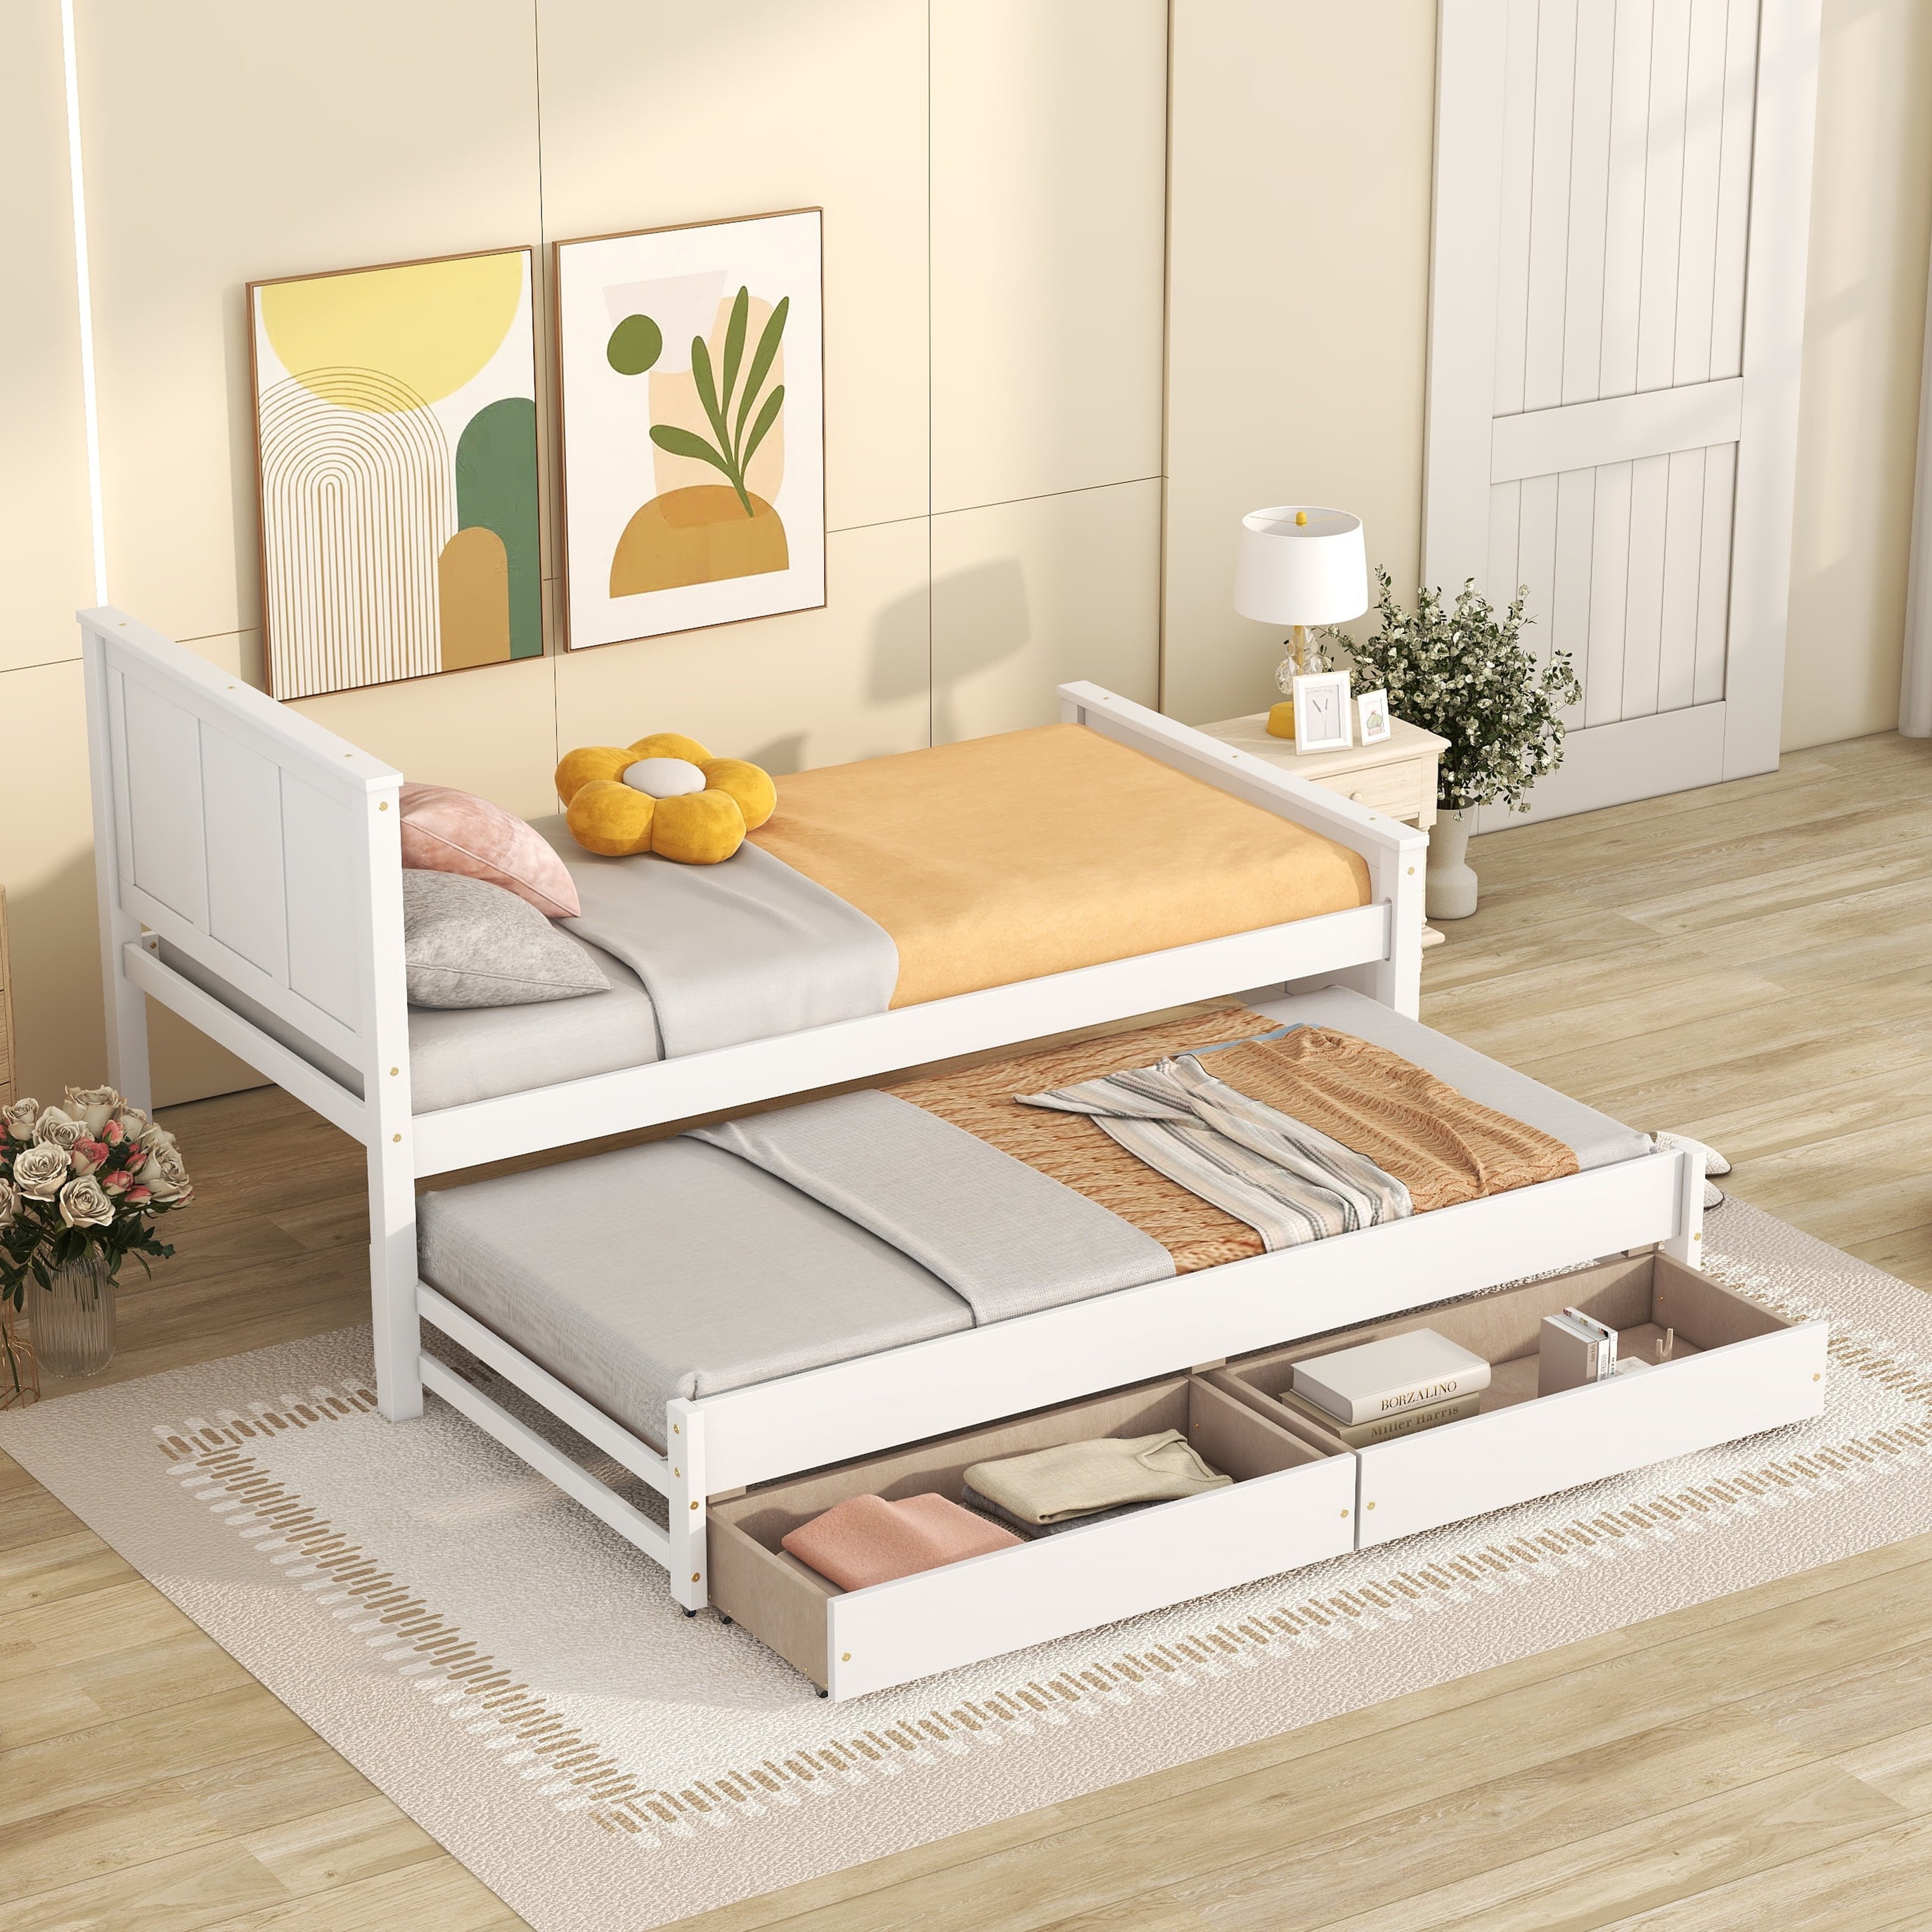 uhomepro Daybed with Trundle and Storage Drawers, Solid Pine Wood Twin ...